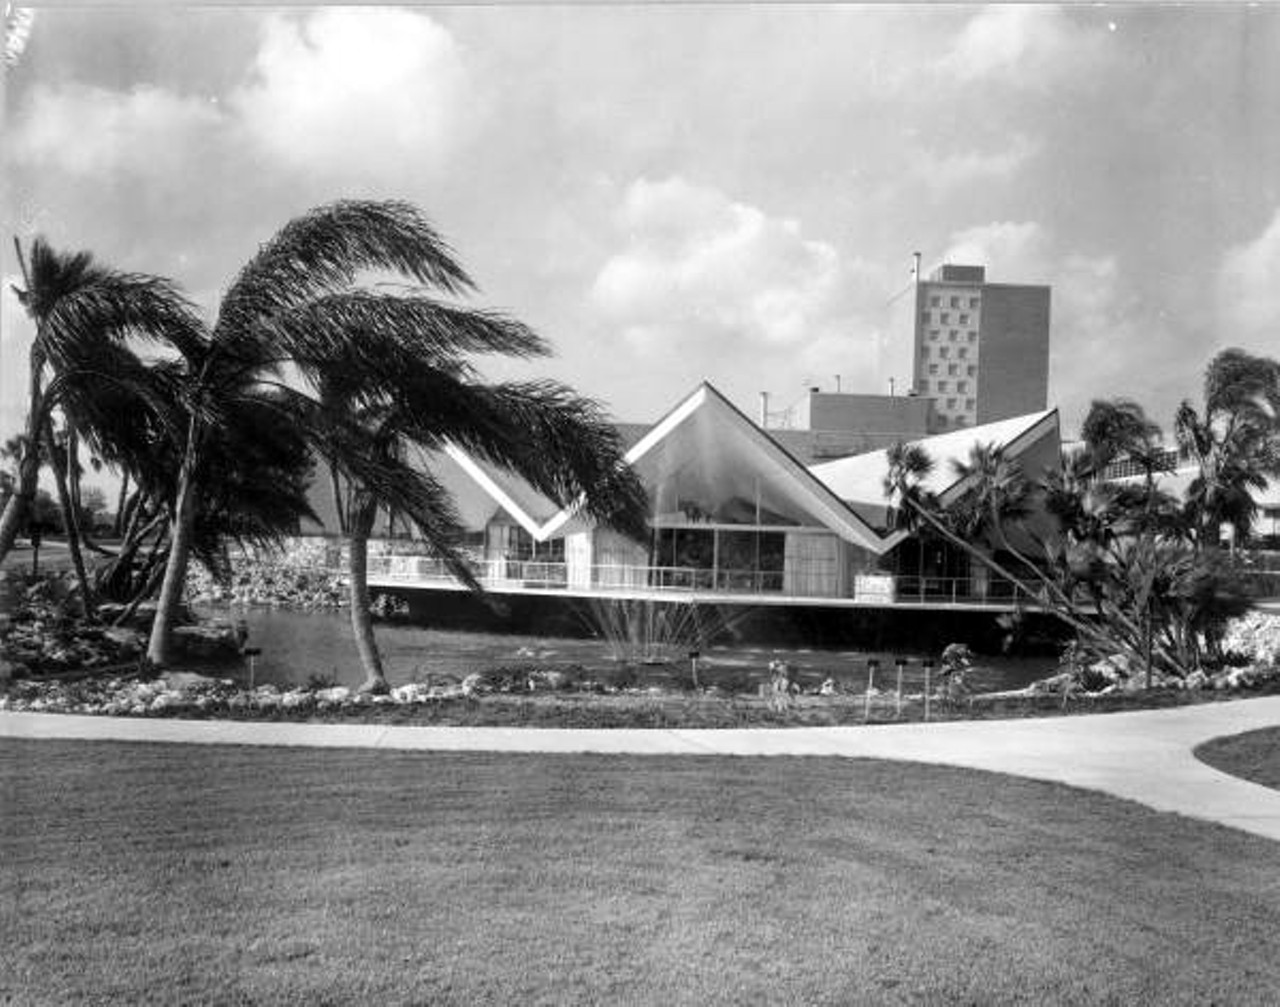 View of Busch Gardens hospitality house. 1959.